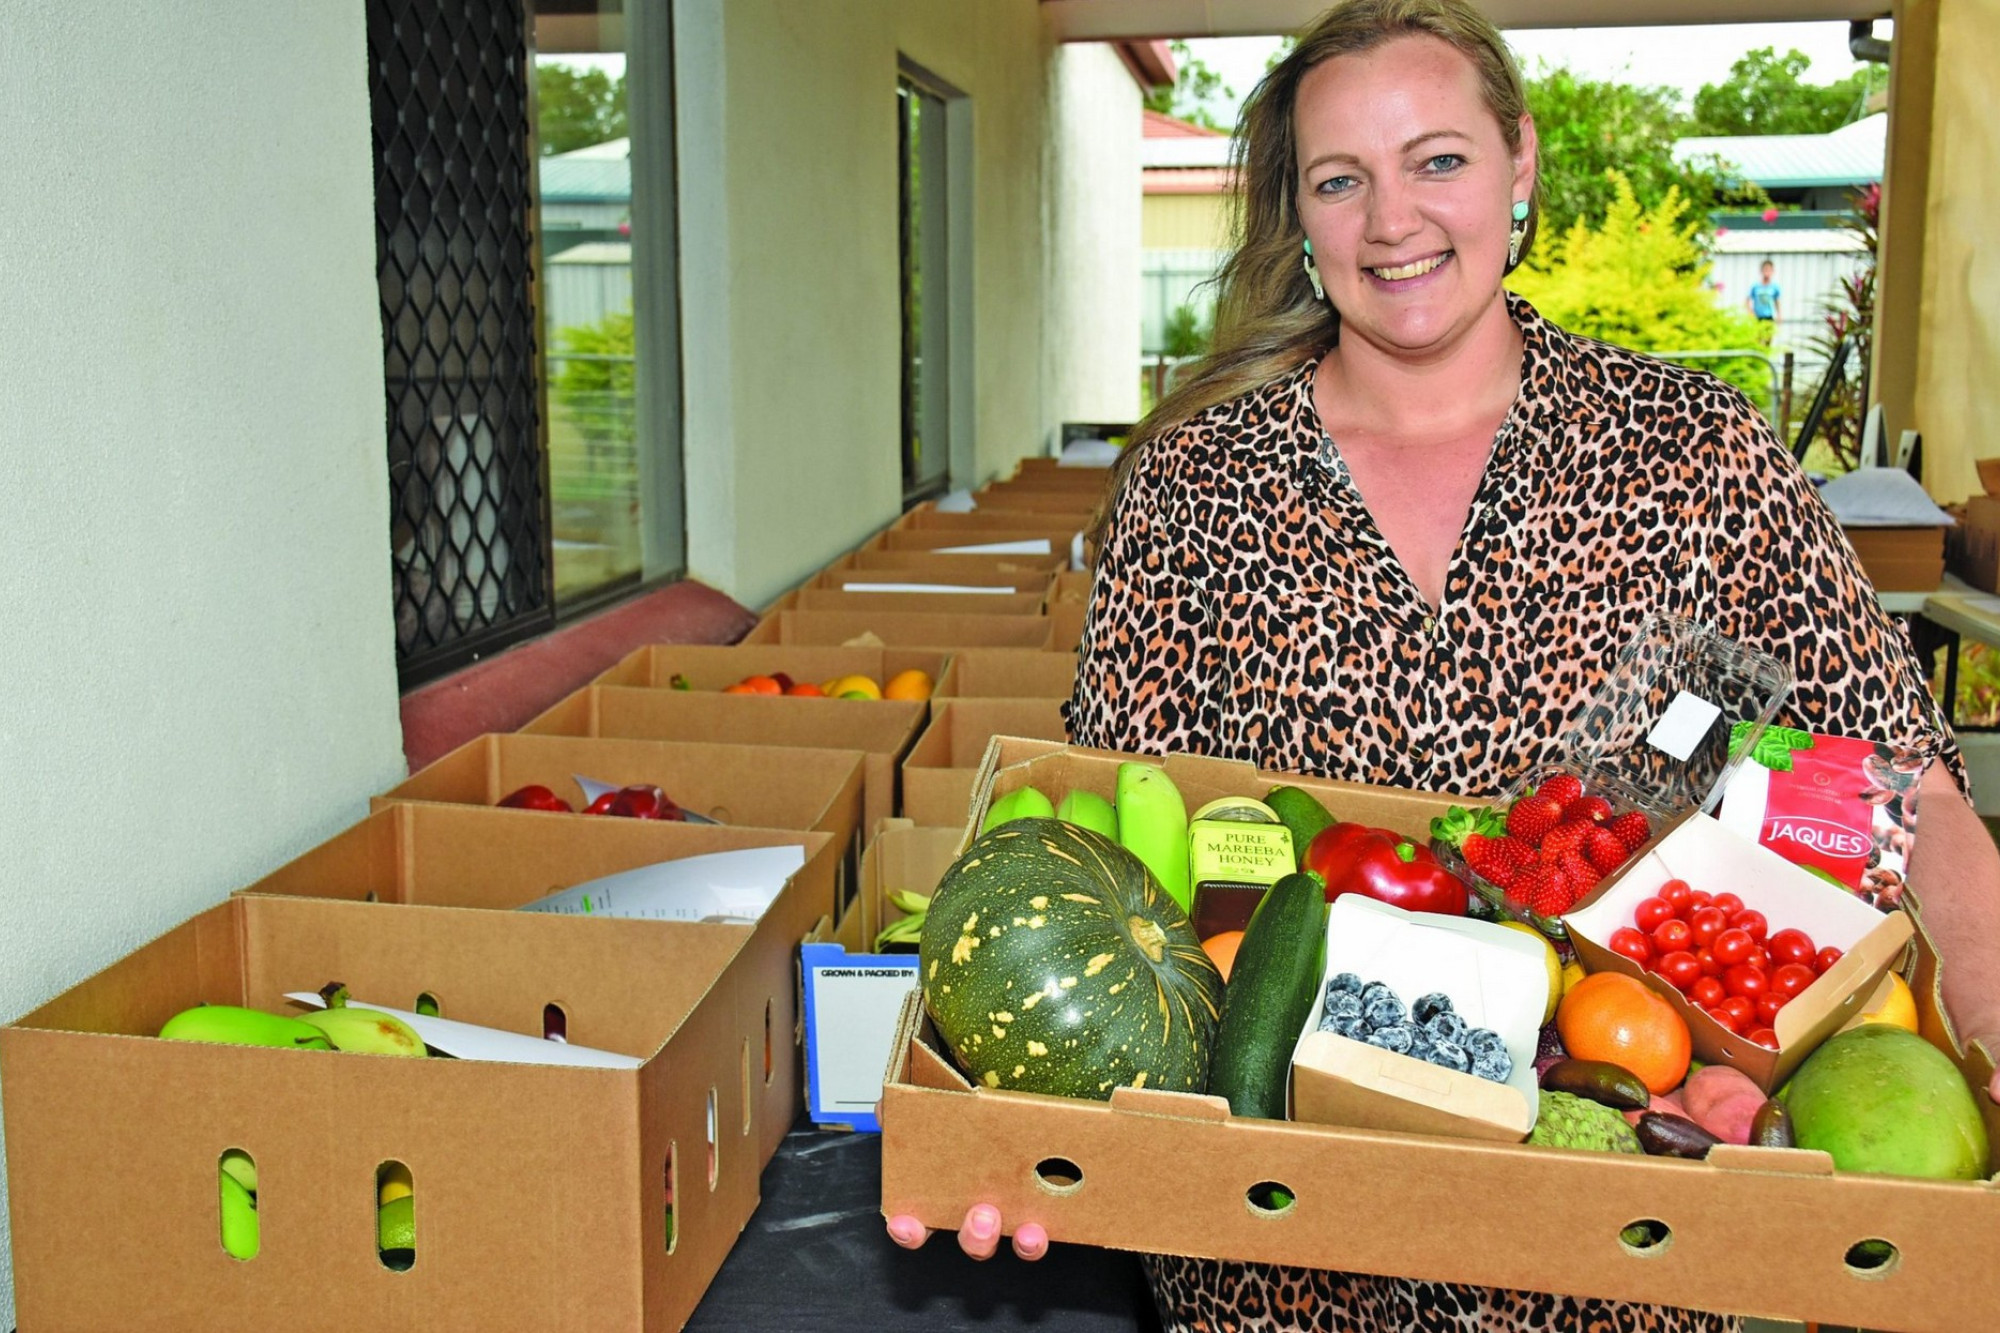 Local fruit and vegetable business takes off - feature photo